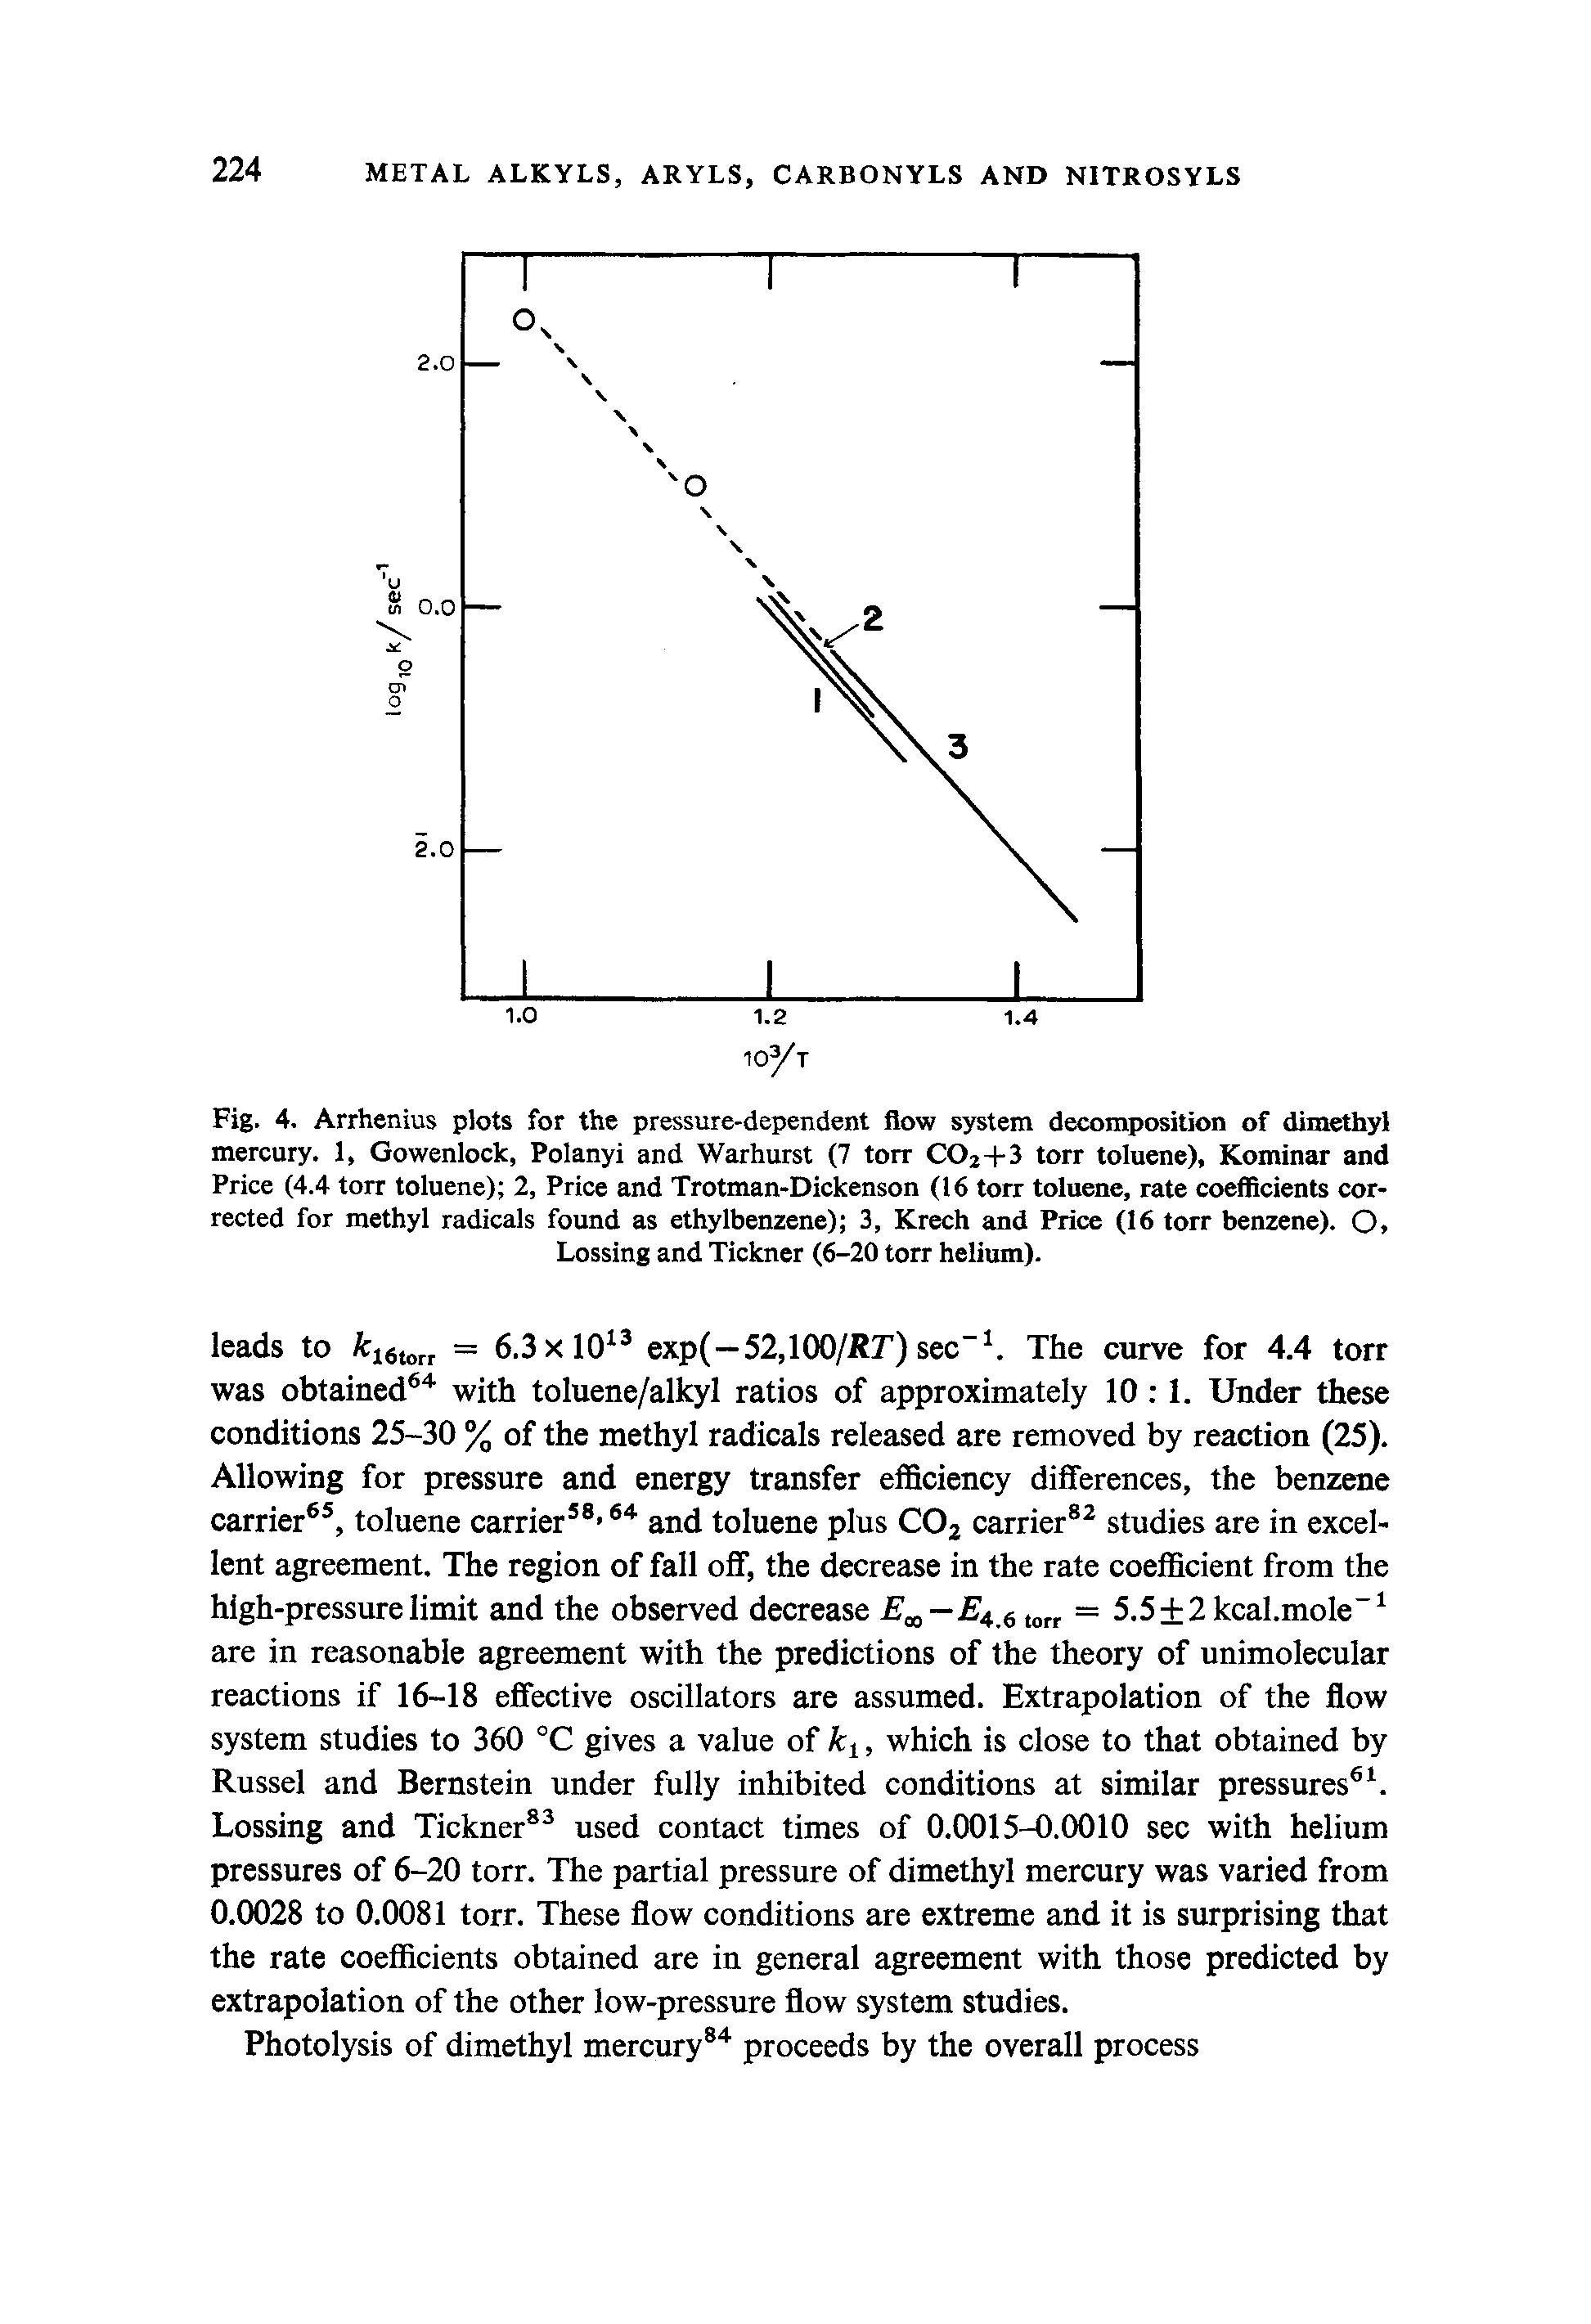 Fig. 4. Arrhenius plots for the pressure-dependent flow system decomposition of dimethyl mercury. 1, Gowenlock, Polanyi and Warhurst (7 torr C02+3 torr toluene), Kominar and Price (4.4 torr toluene) 2, Price and Trotman-Dickenson (16 torr toluene, rate coefficients corrected for methyl radicals found as ethylbenzene) 3, Krech and Price (16 torr benzene). O, Lossing and Tickner (6-20 torr helium).